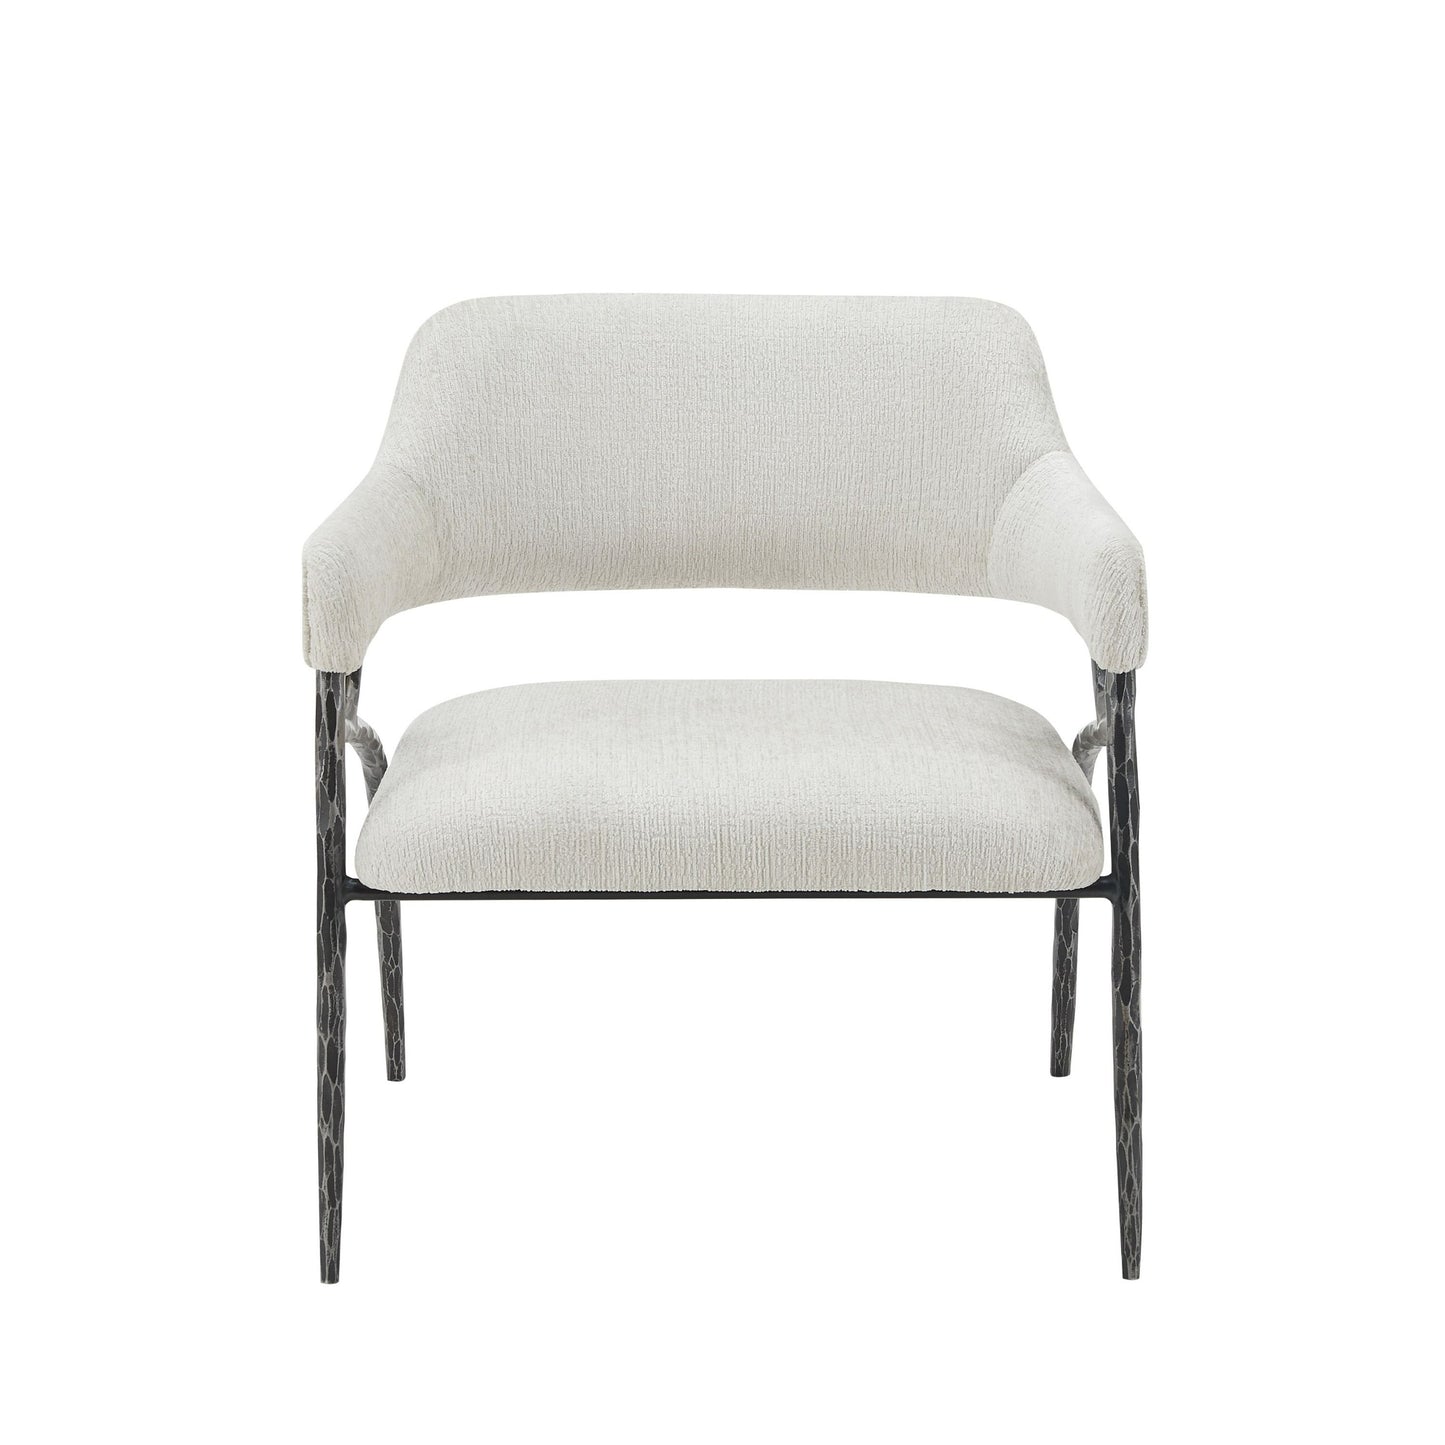 Modrest Ector - Modern Off-White Fabric + Forged Metal Accent Chair